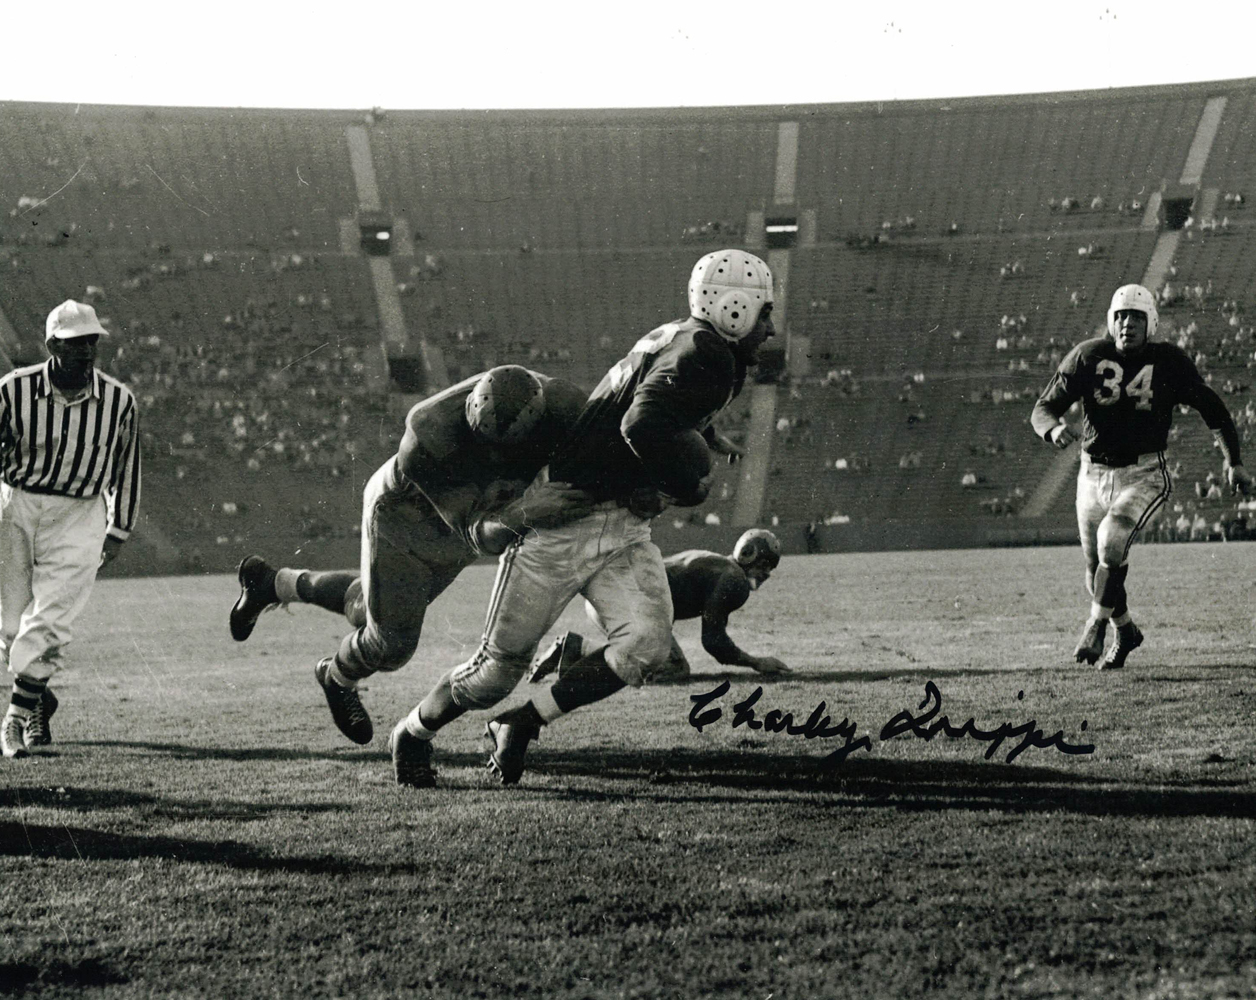 Charley Trippi Autographed/Signed Chicago Cardinals 8x10 Photo 30215